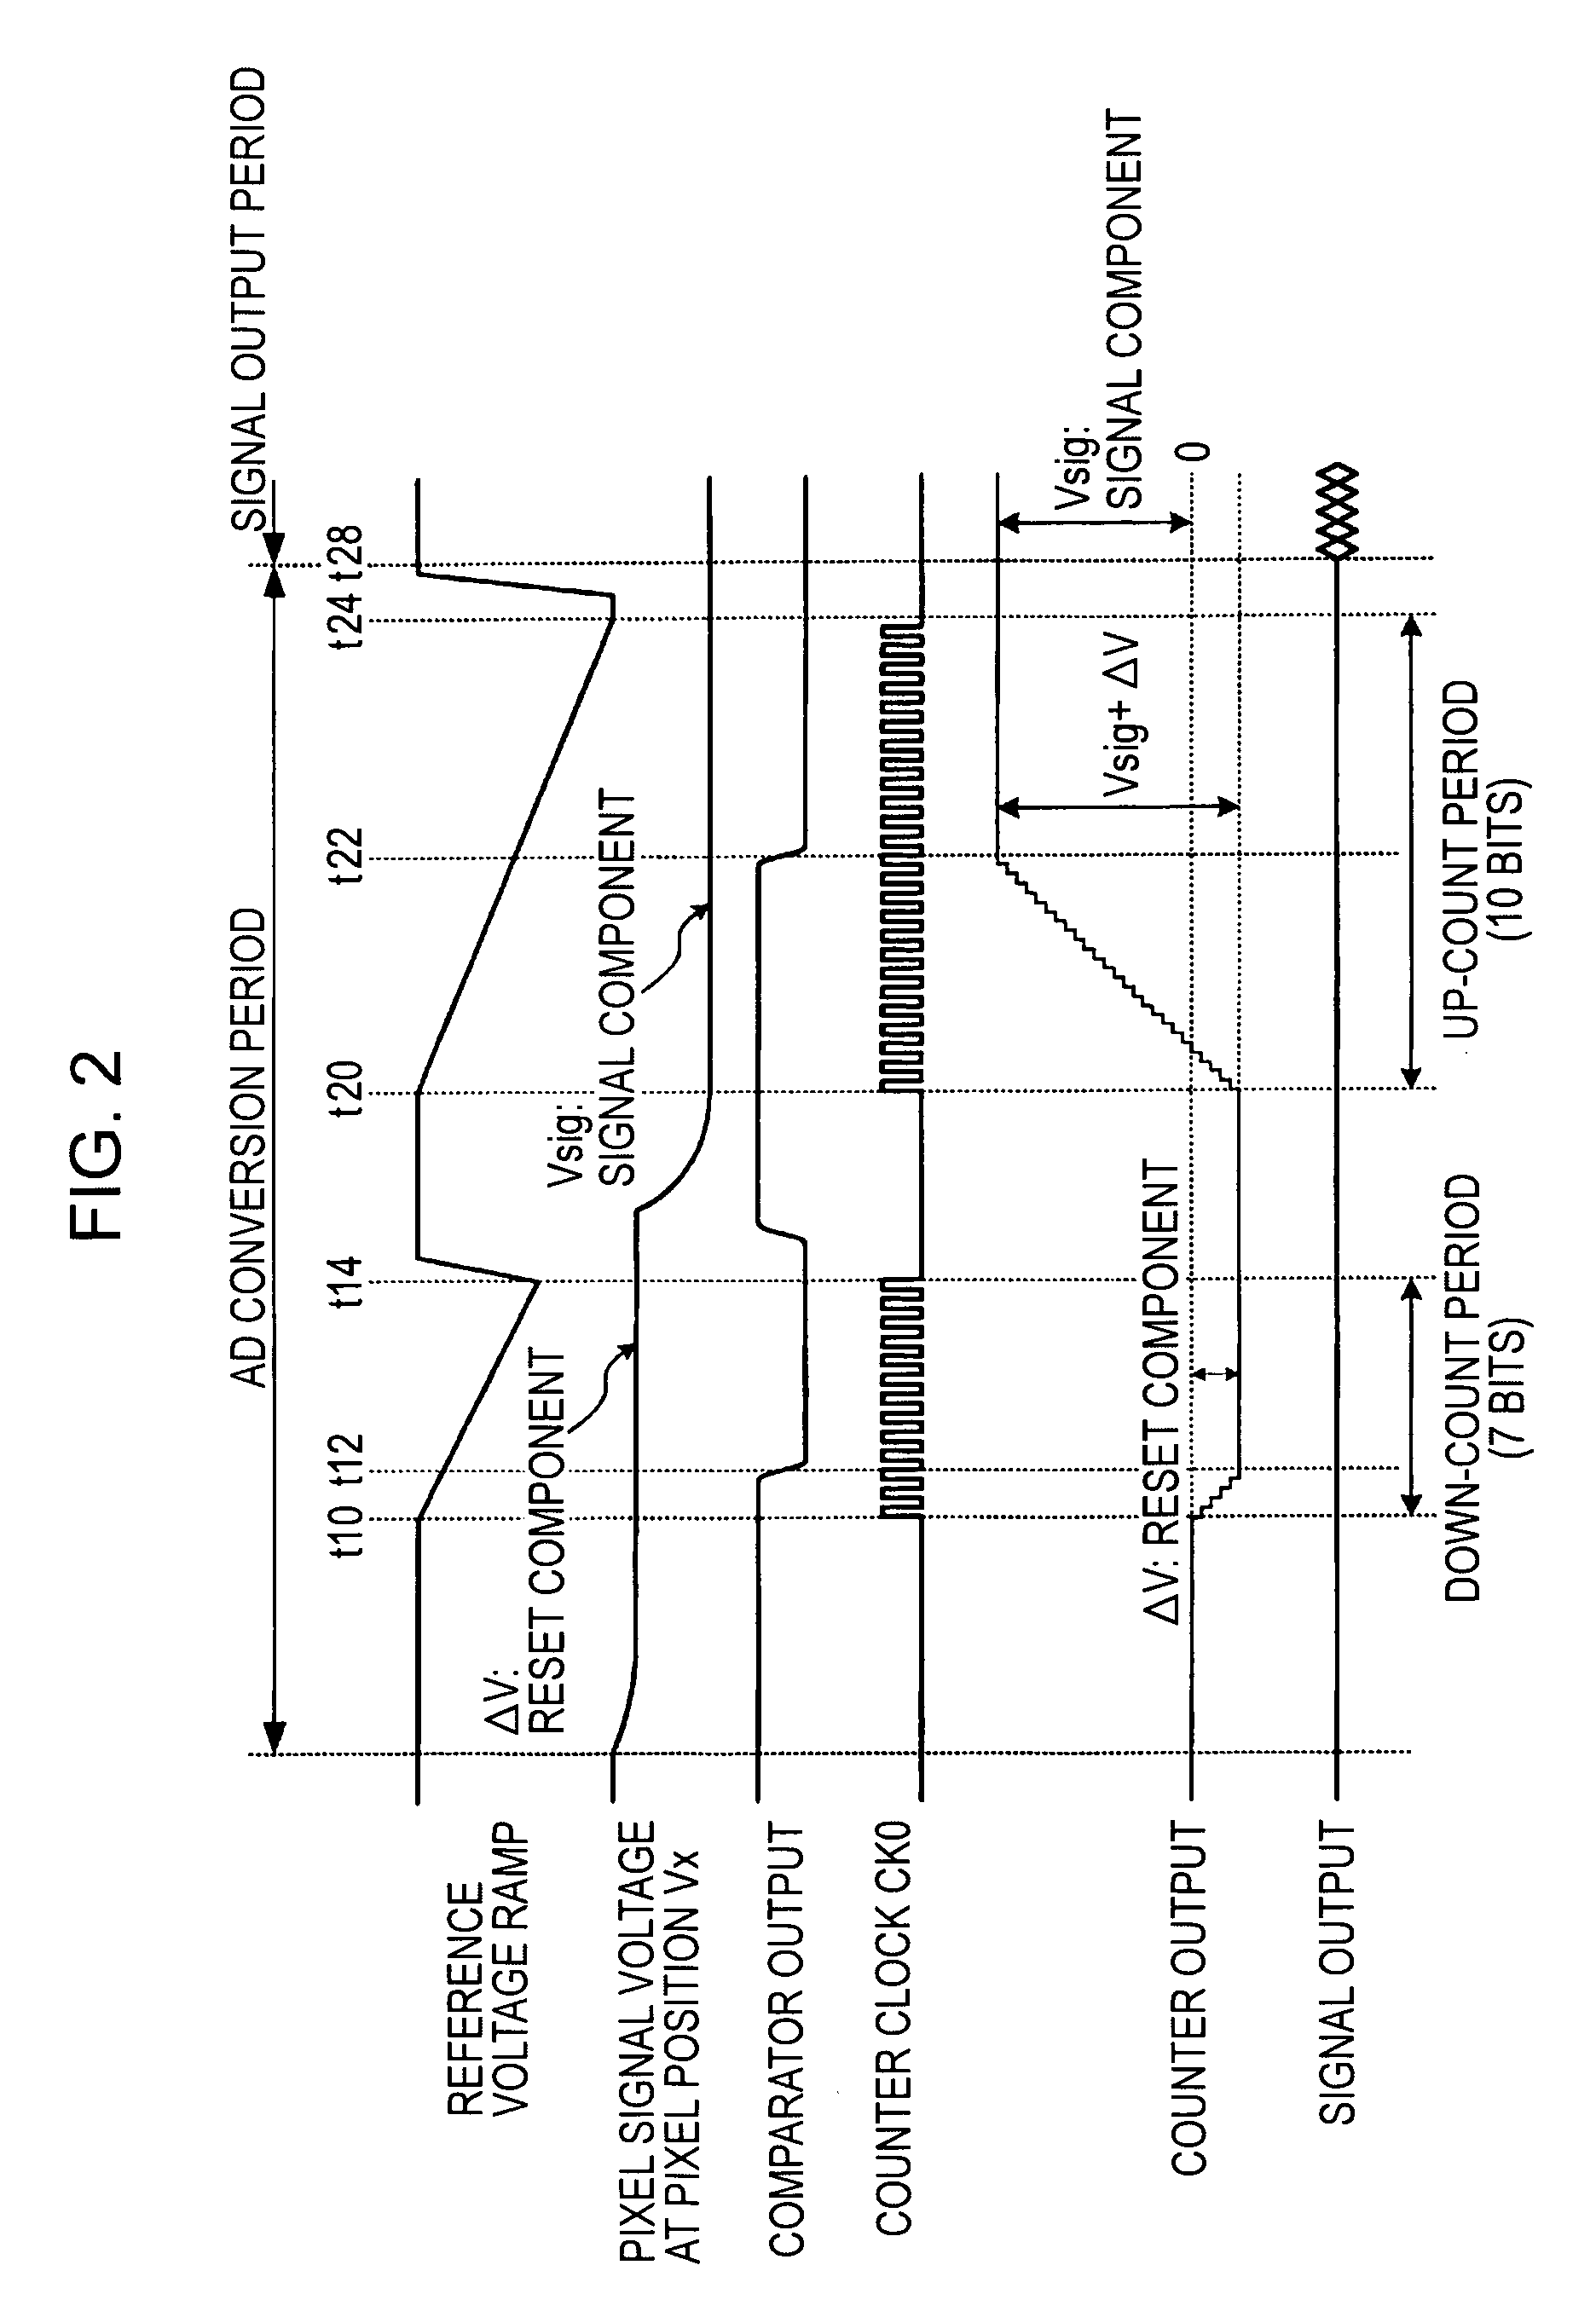 Method and apparatus for AD conversion, semiconductor device for detecting distribution of physical quantity, and electronic apparatus